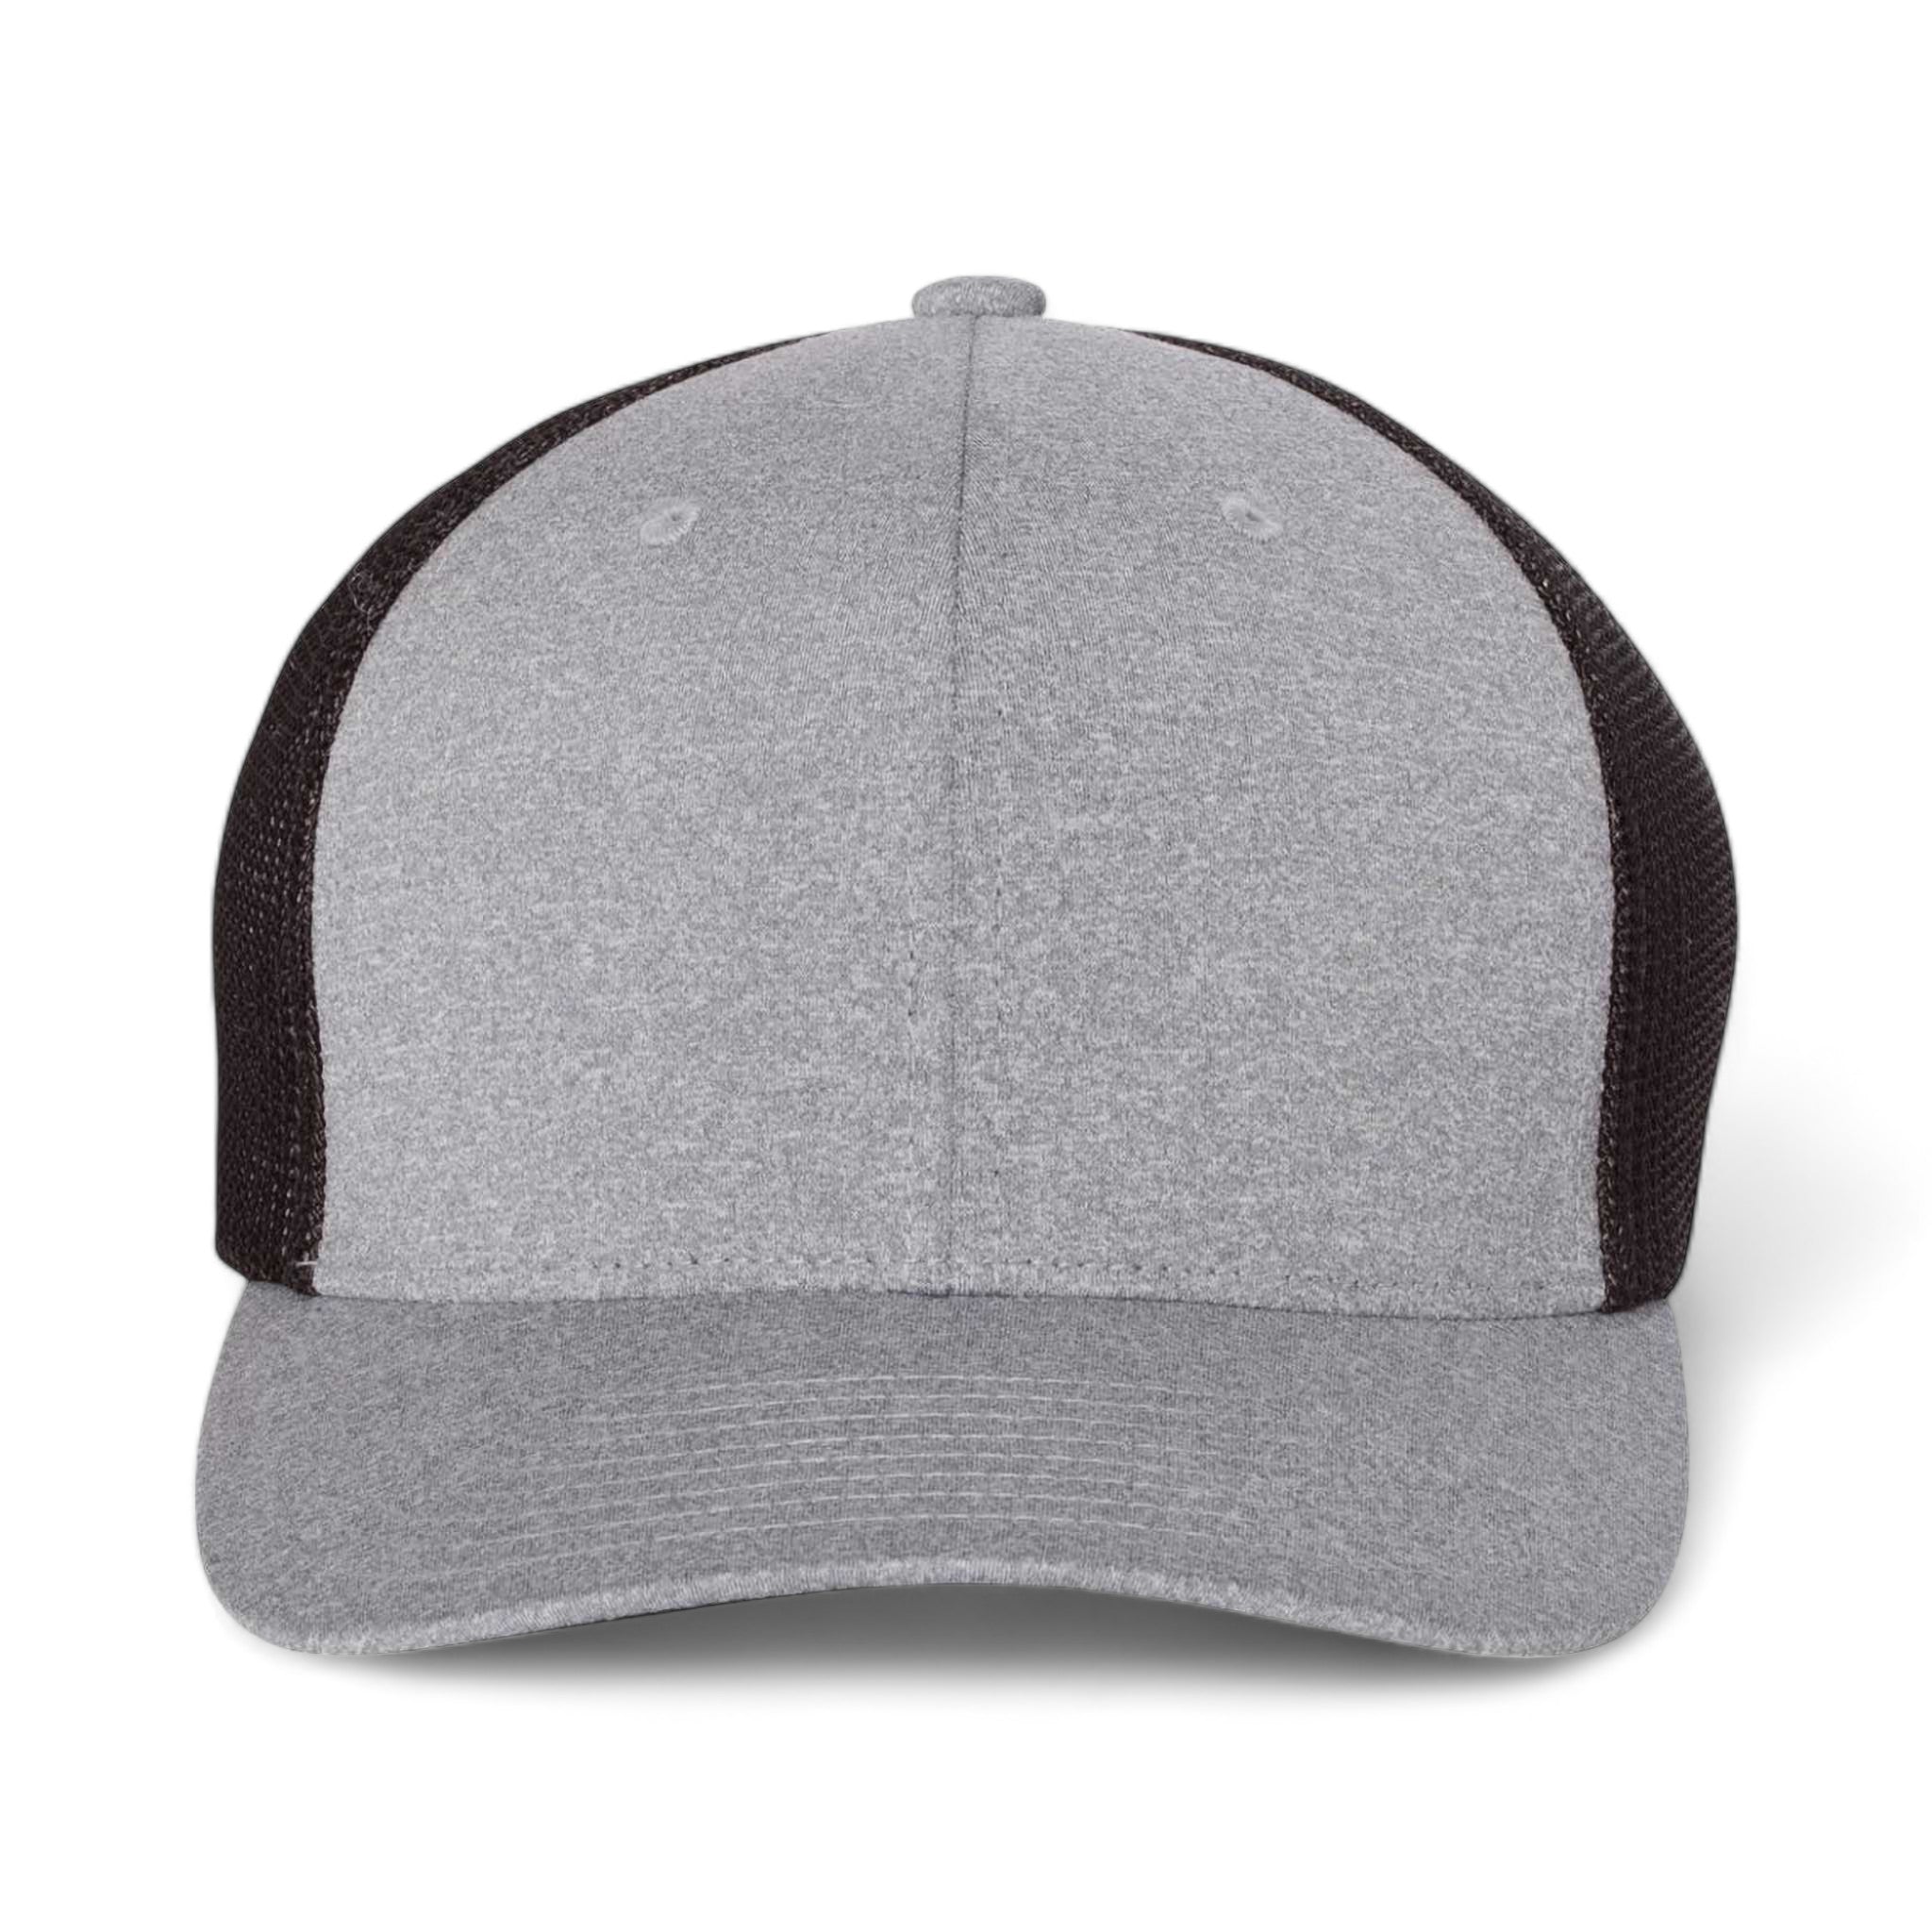 Front view of Flexfit 6311 custom hat in heather grey and black